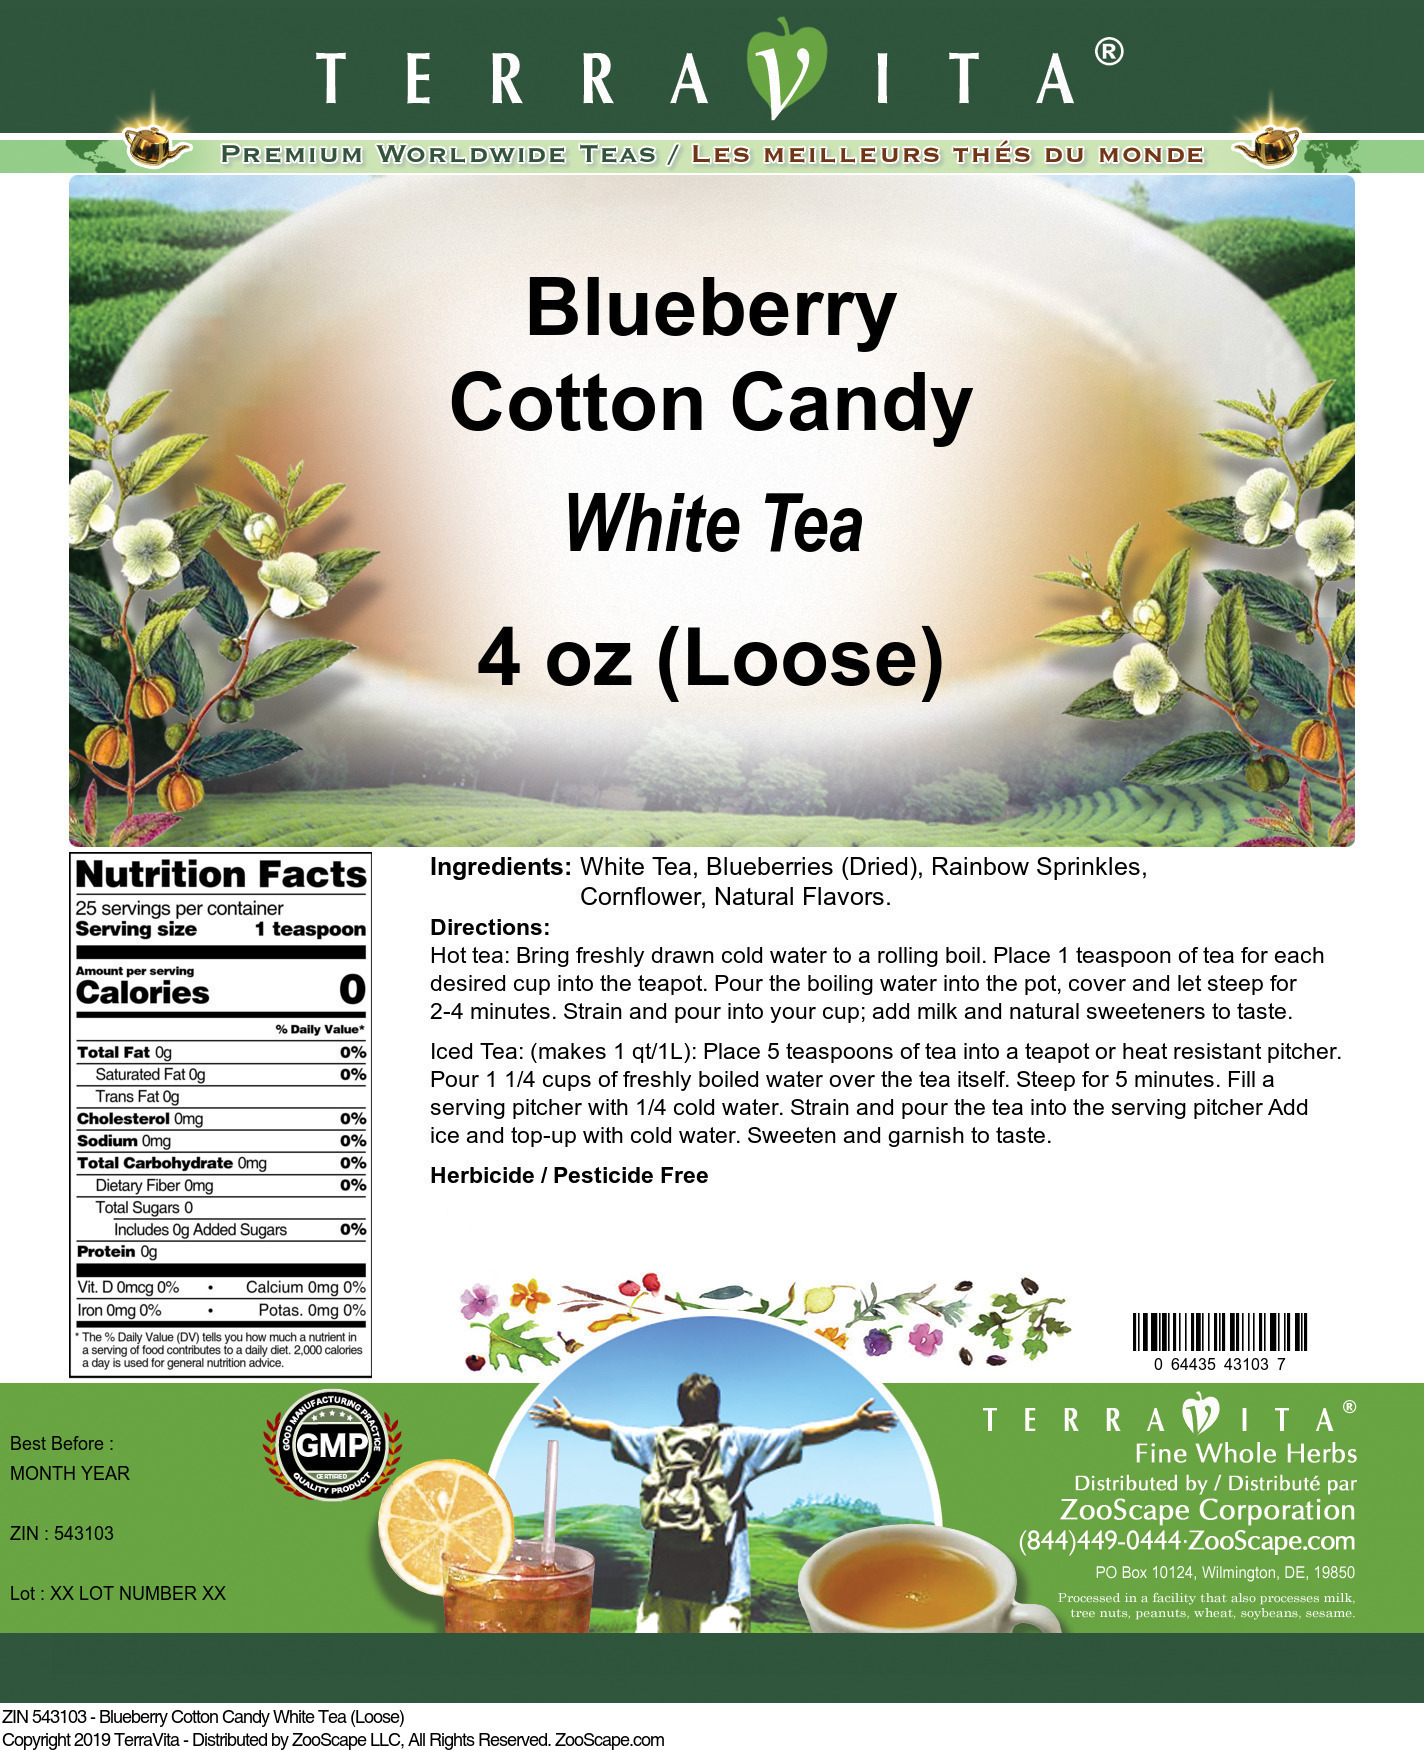 Blueberry Cotton Candy White Tea (Loose) - Label